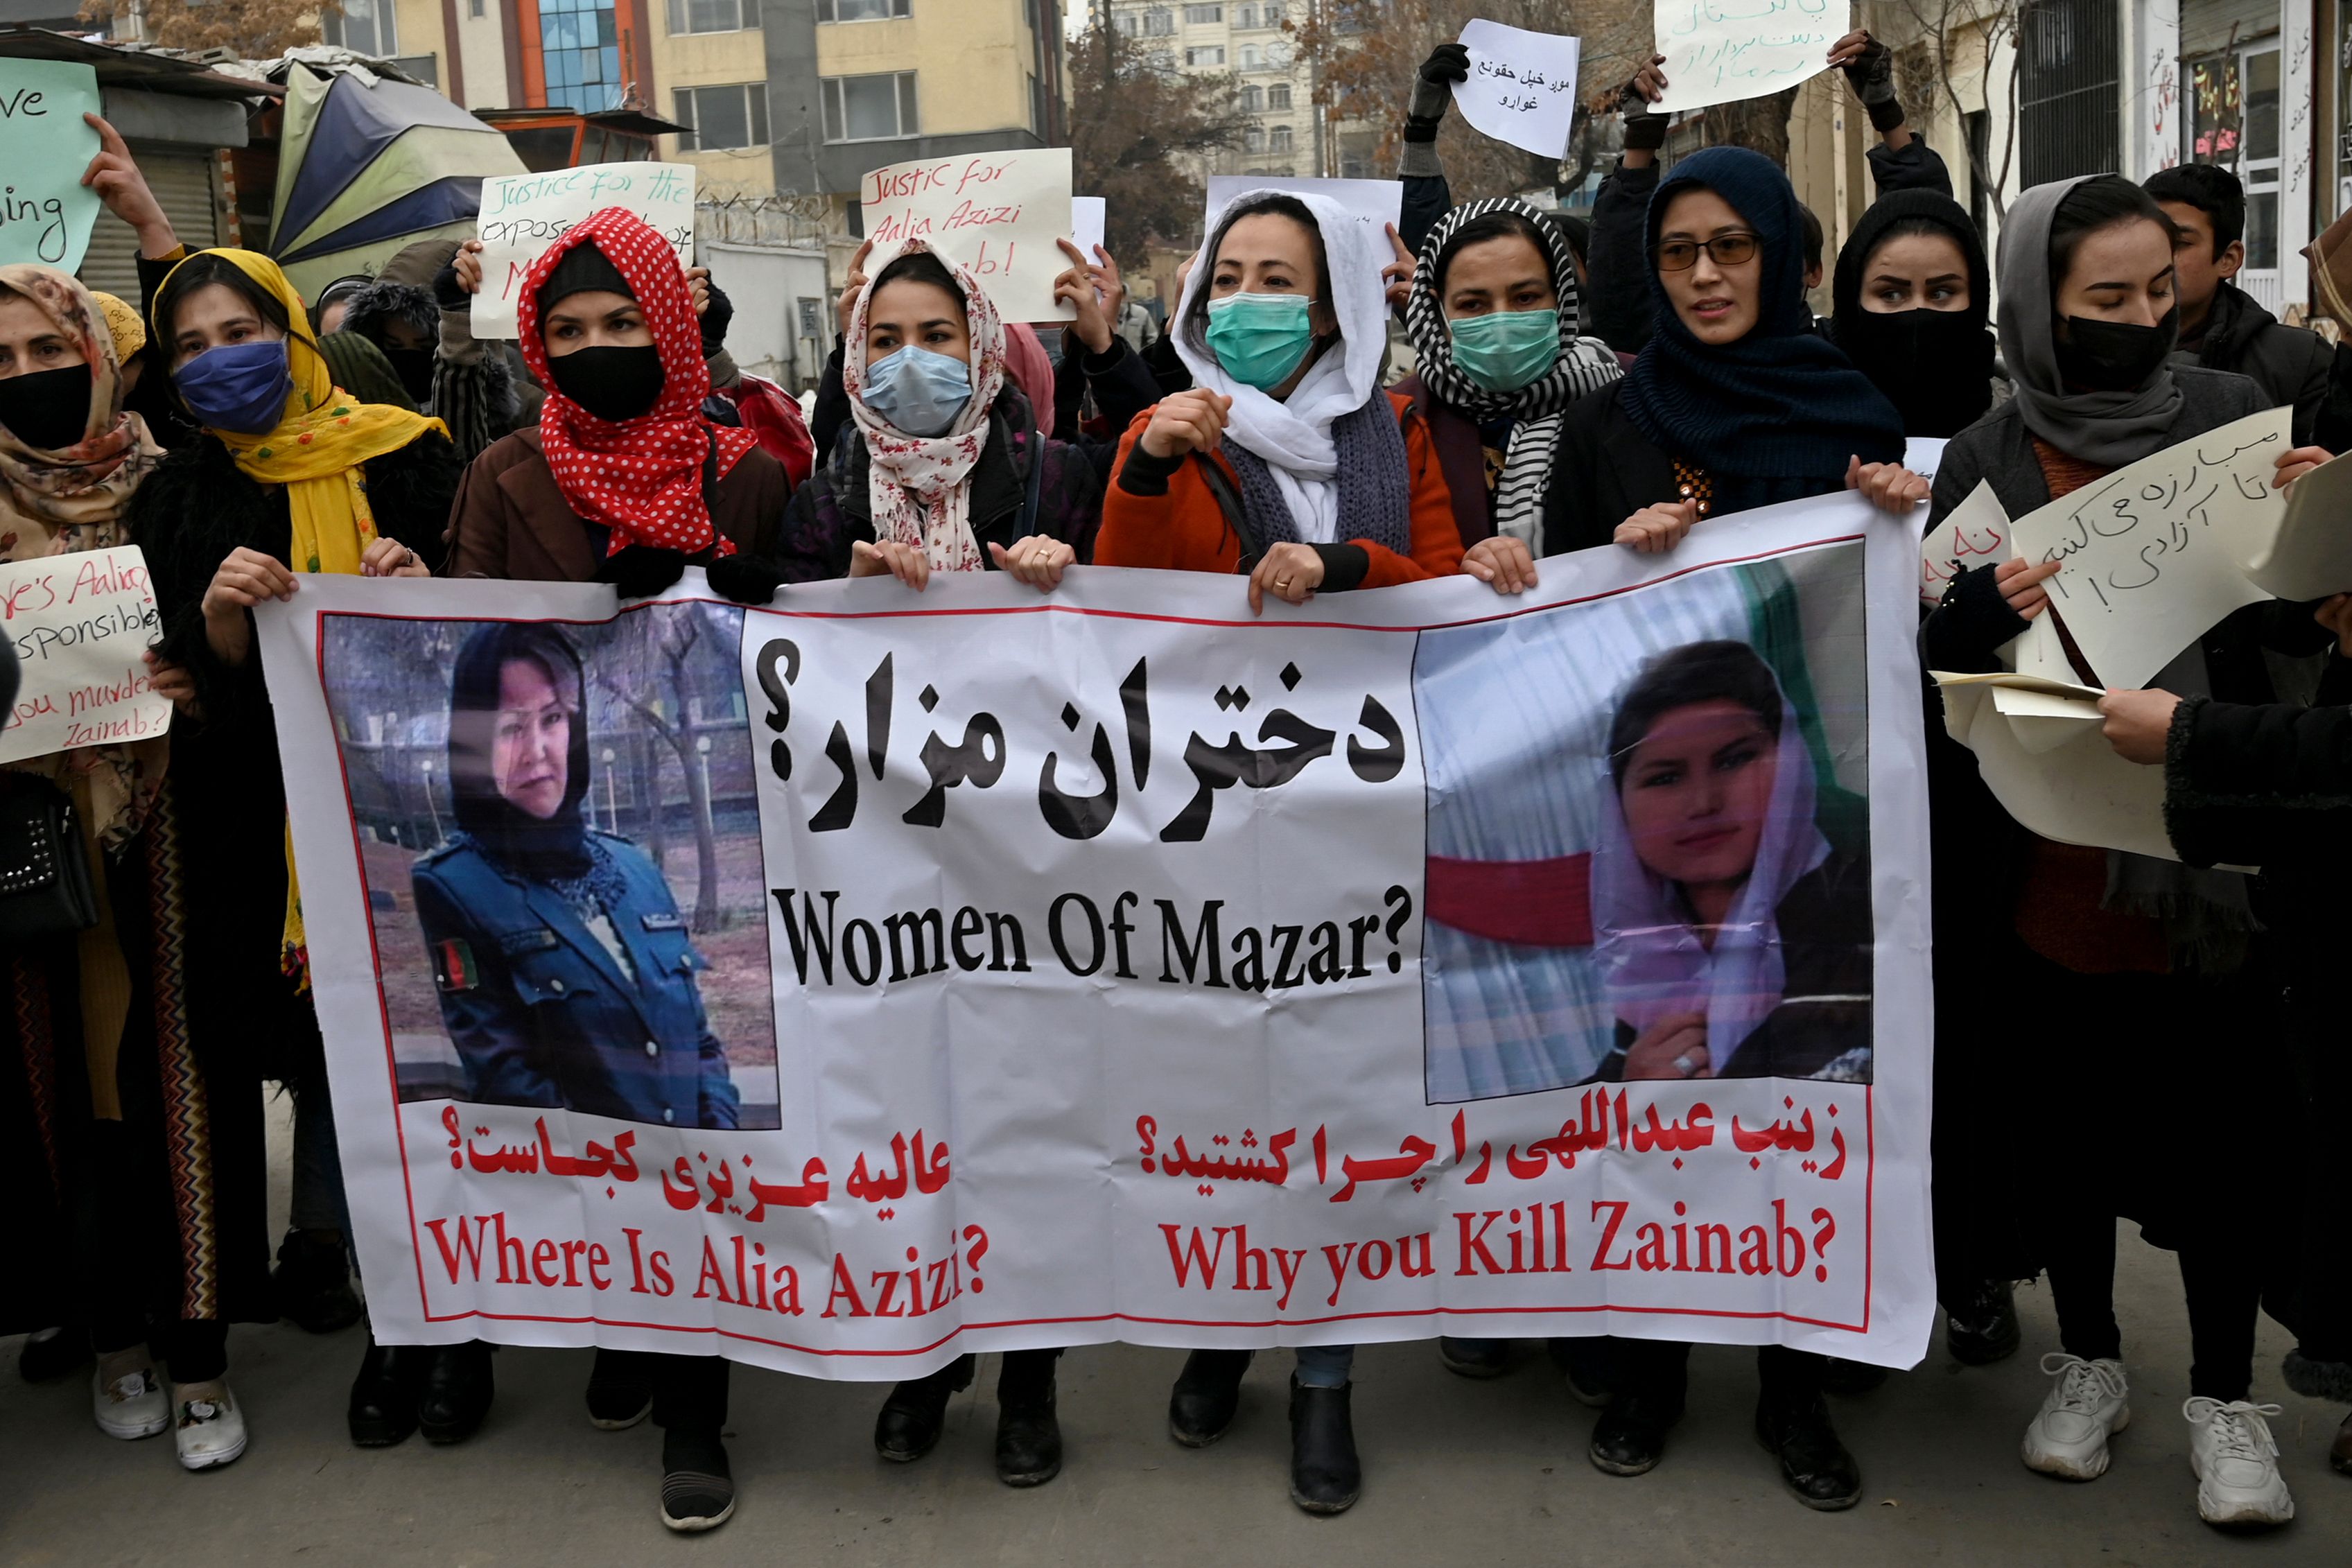 File photo: Afghan women march as they chant slogans and hold banners during a women’s rights protest in Kabul on 16 January 2022